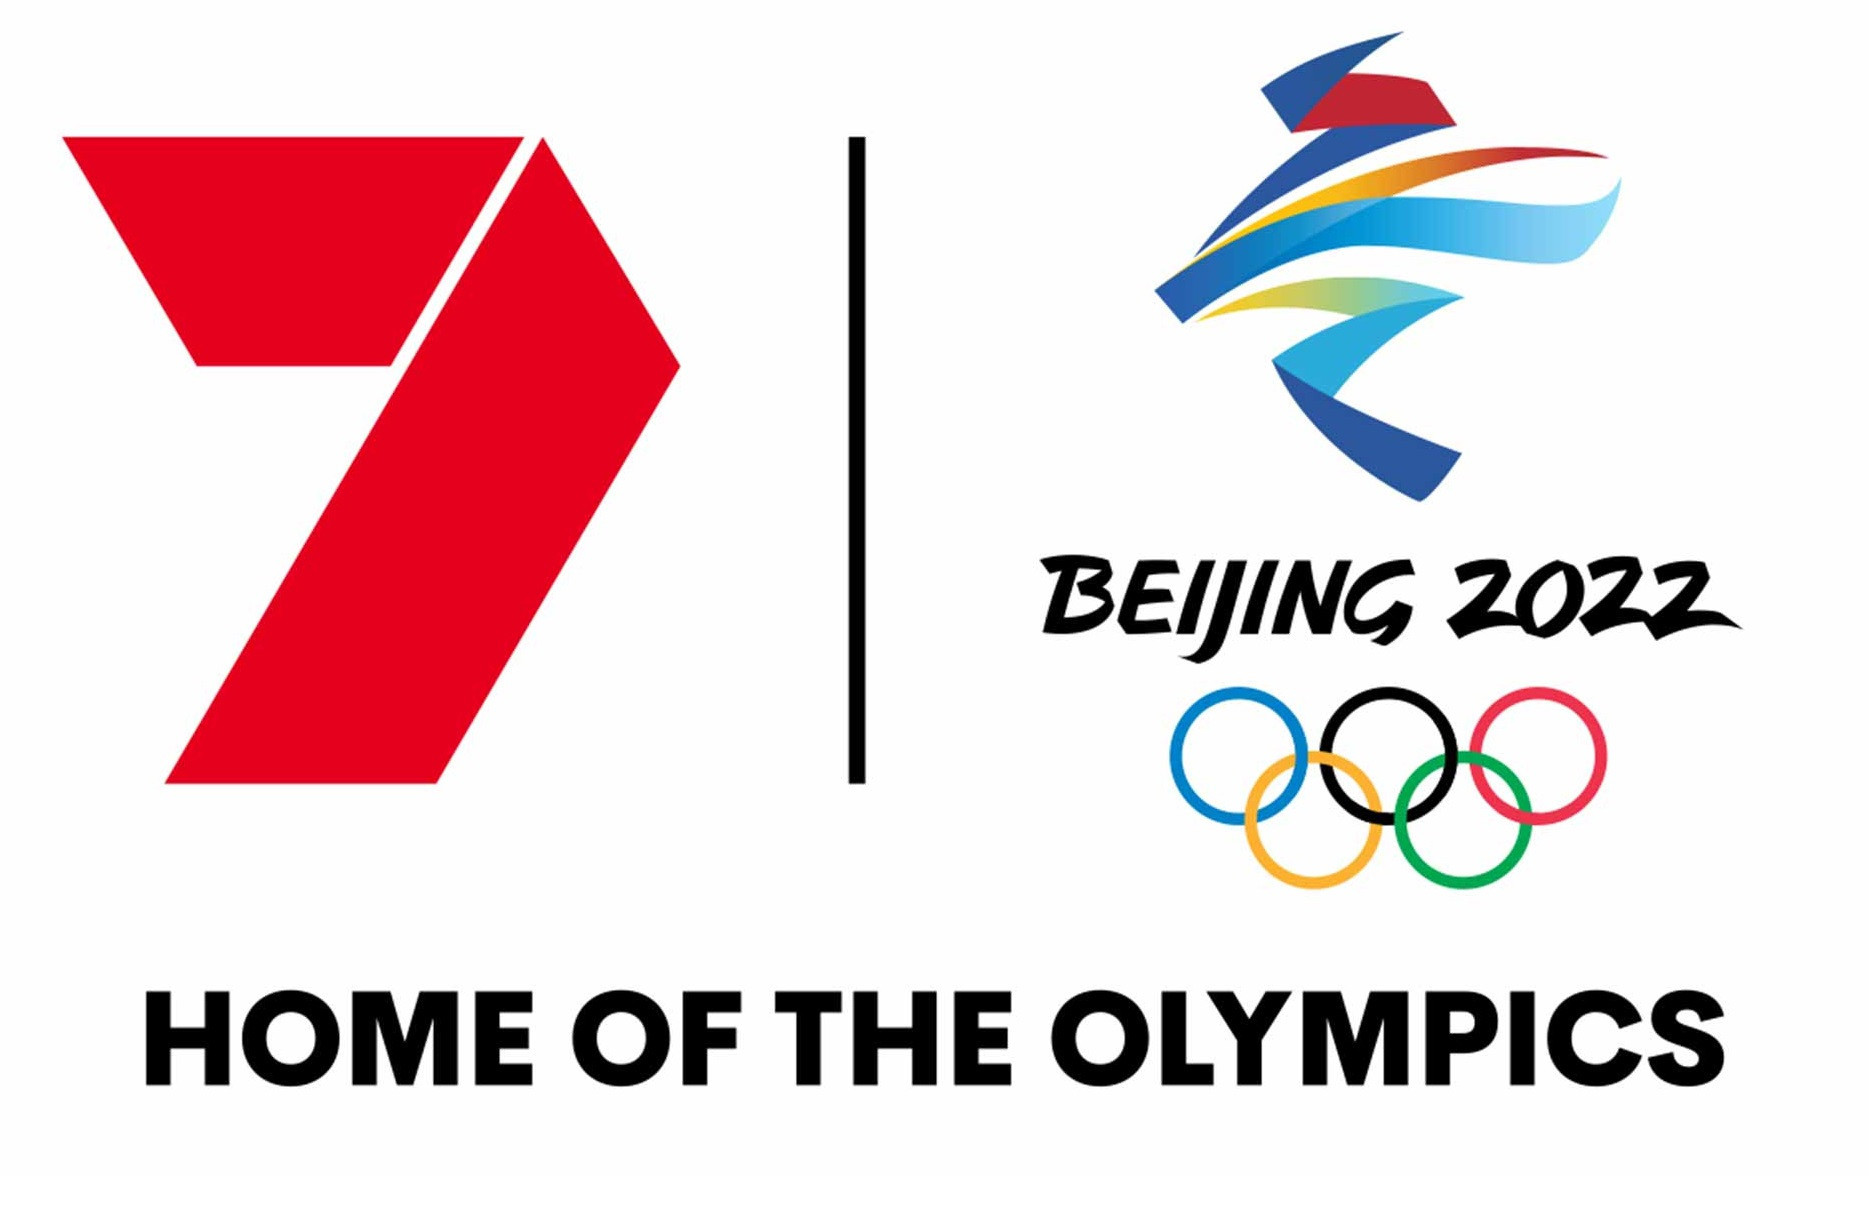 Seven Network secures Australian TV rights for Beijing 2022 as IOC extends deal